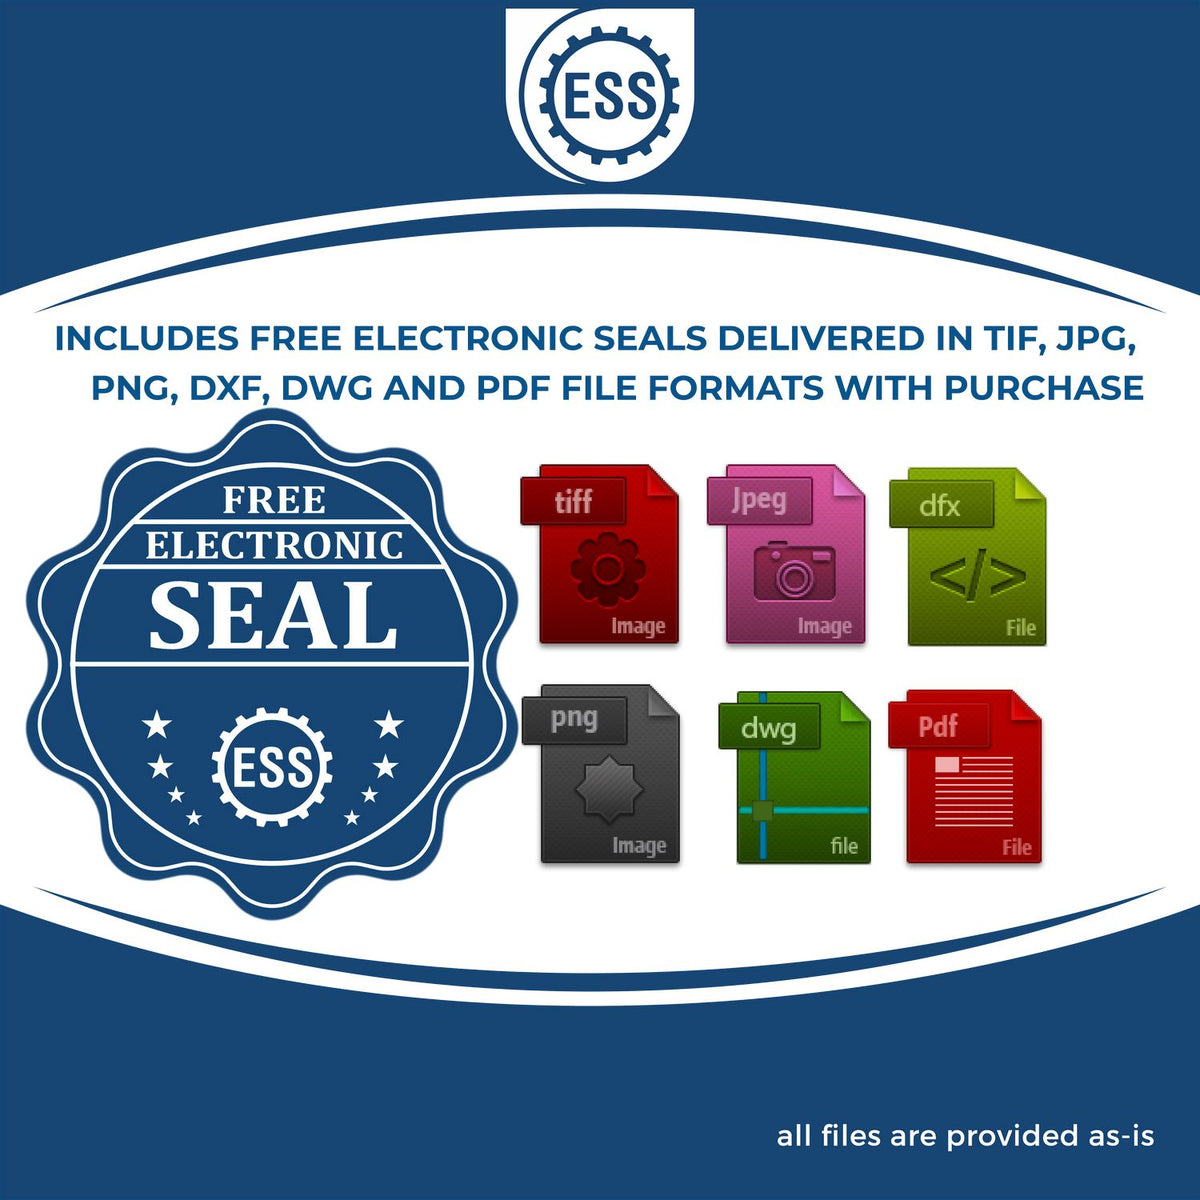 An infographic for the free electronic seal for the Self-Inking Rectangular Puerto Rico Notary Stamp illustrating the different file type icons such as DXF, DWG, TIF, JPG and PNG.